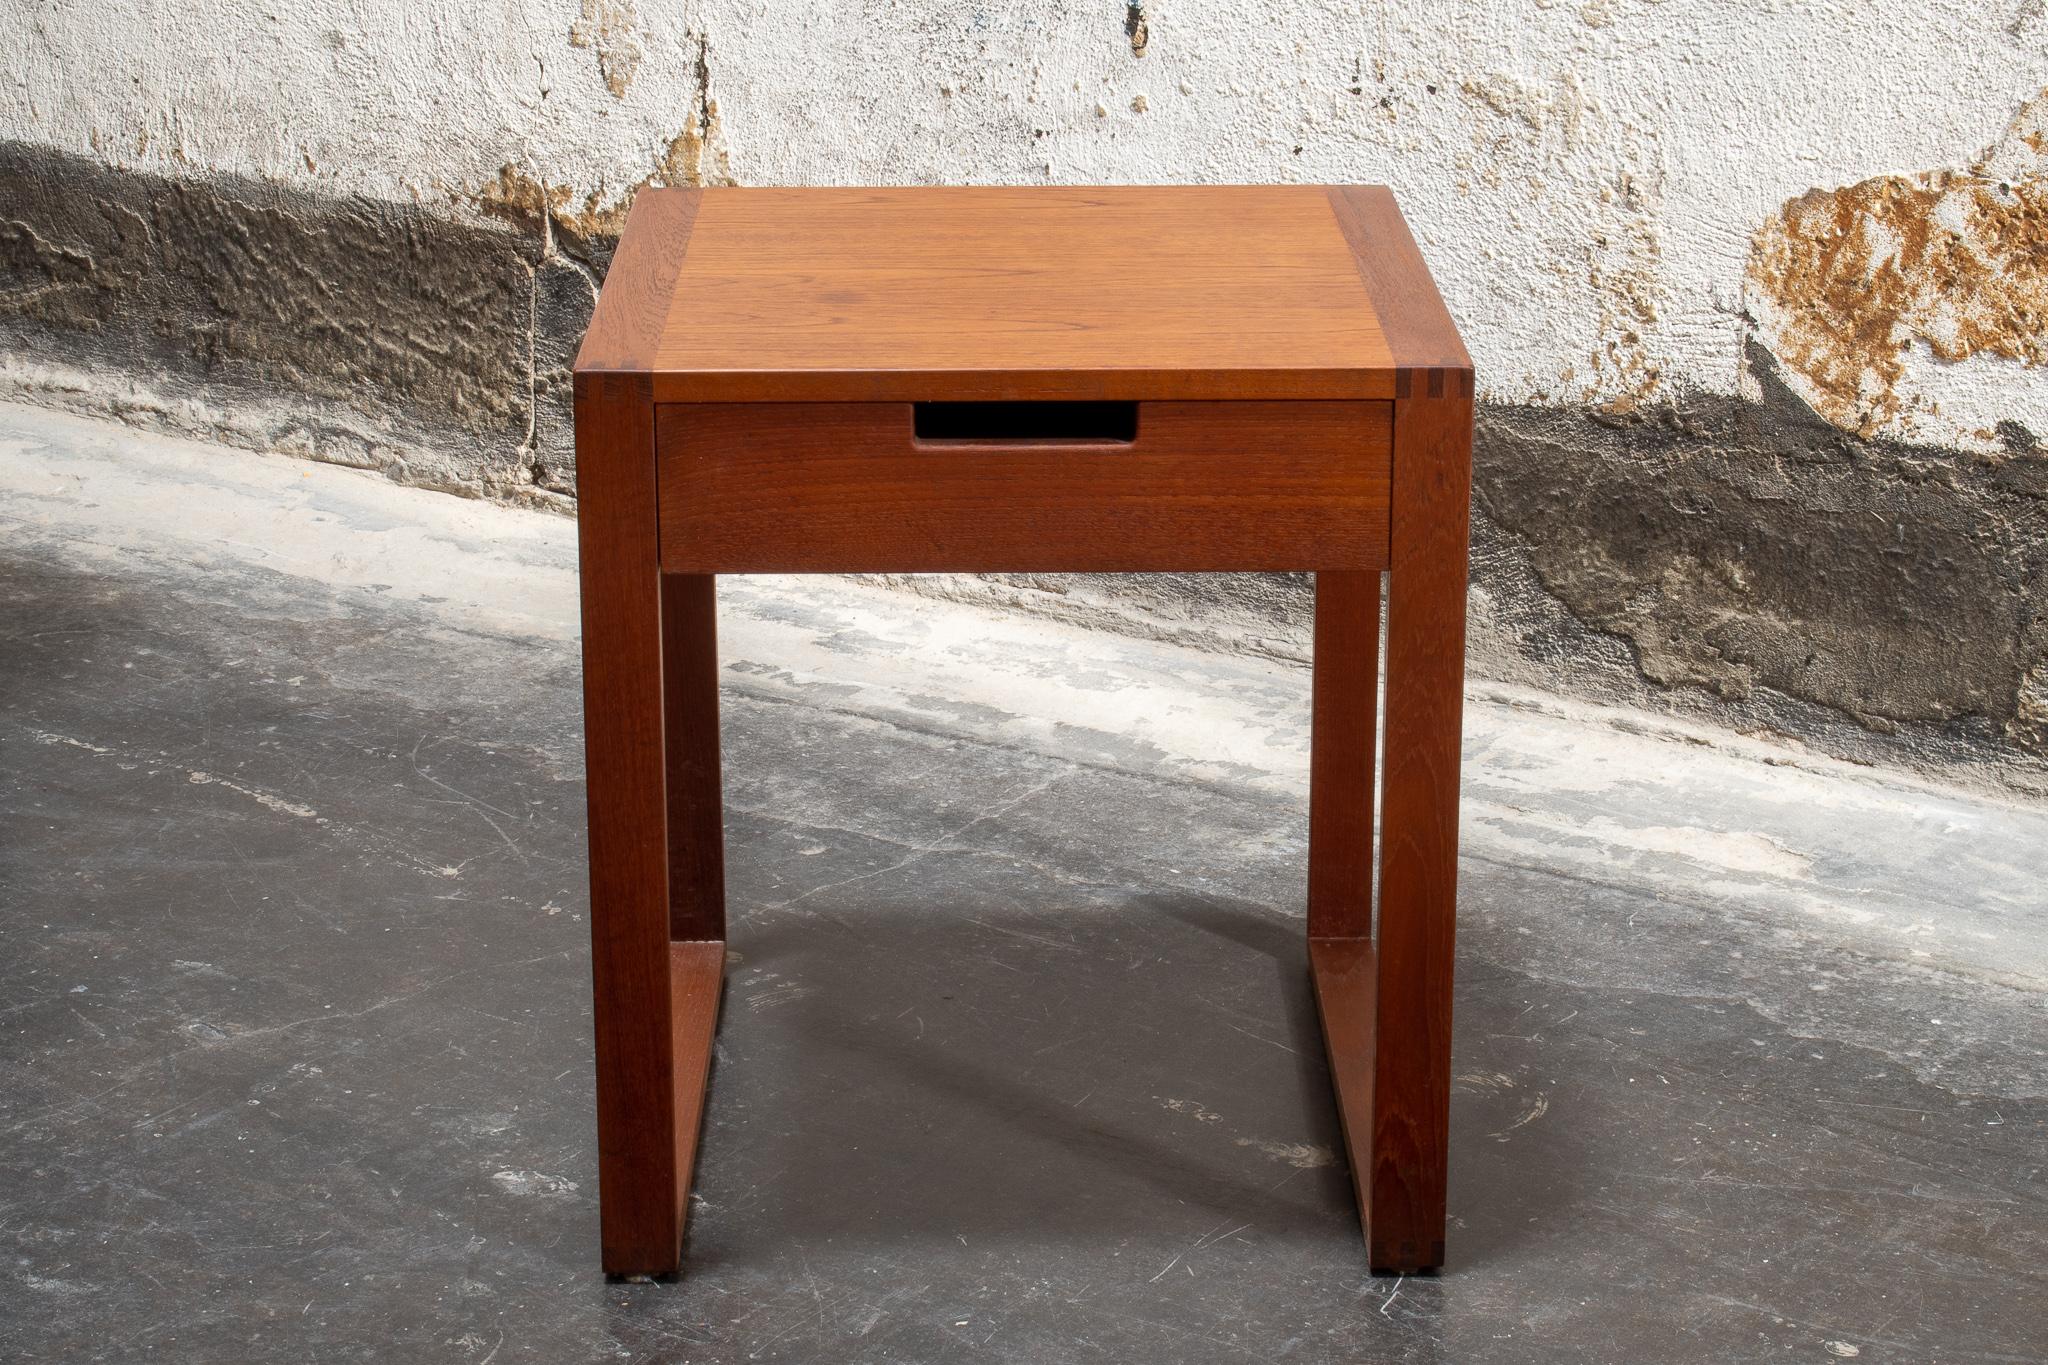 Mid Century Modern nightstand from Sweden, circa 1960. This Scandinavian teak side table has  u-shape table legs, and a small dovetail joined drawer. This Swedish Modern table is perfectly sized for use as a Minimalist bedside table or as a small